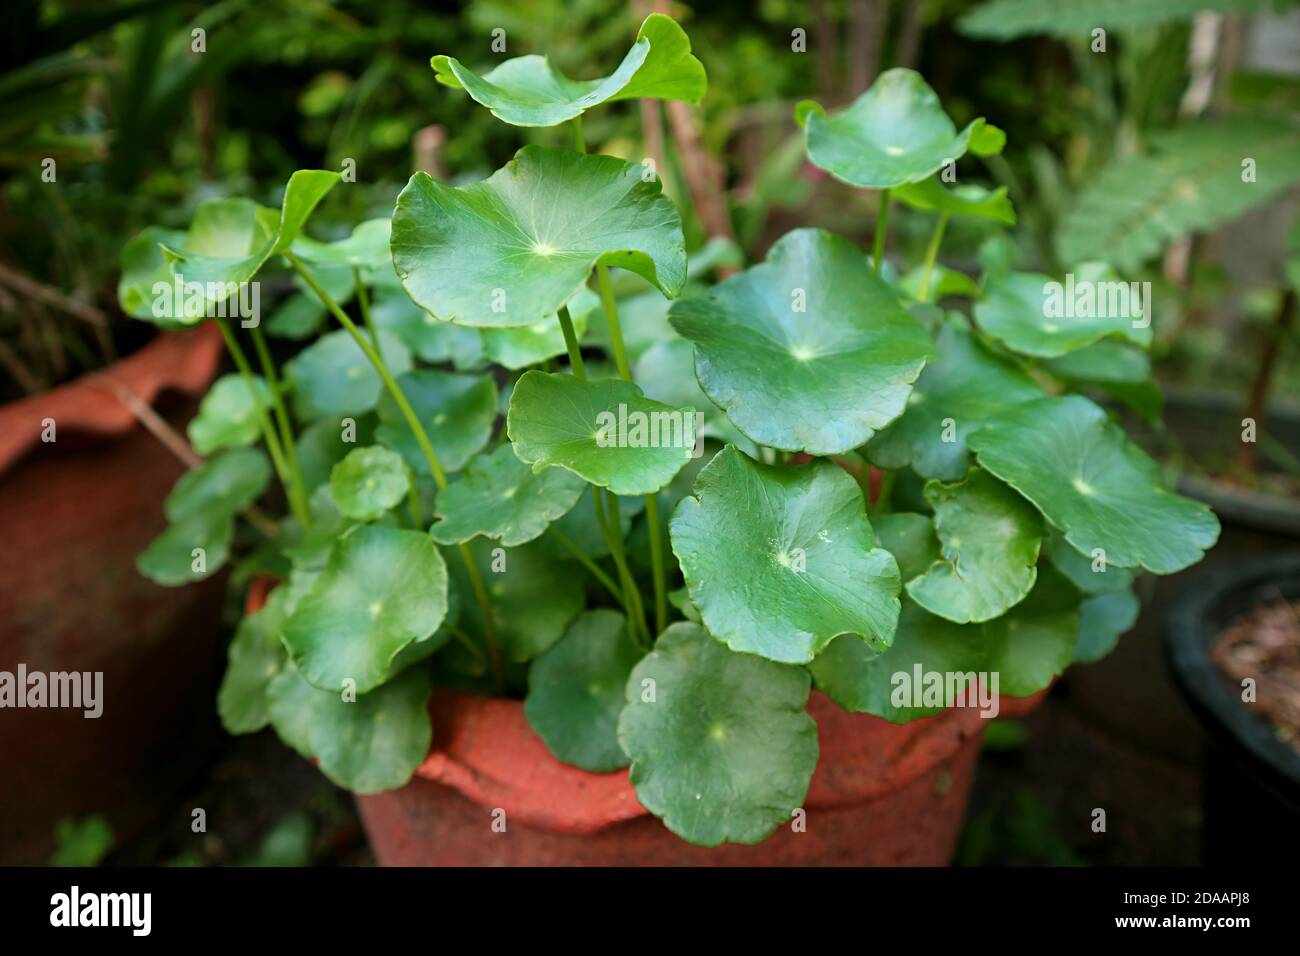 Potted Water Pennywort Plant or Hydrocotyle Umbellata in the Backyard Stock Photo